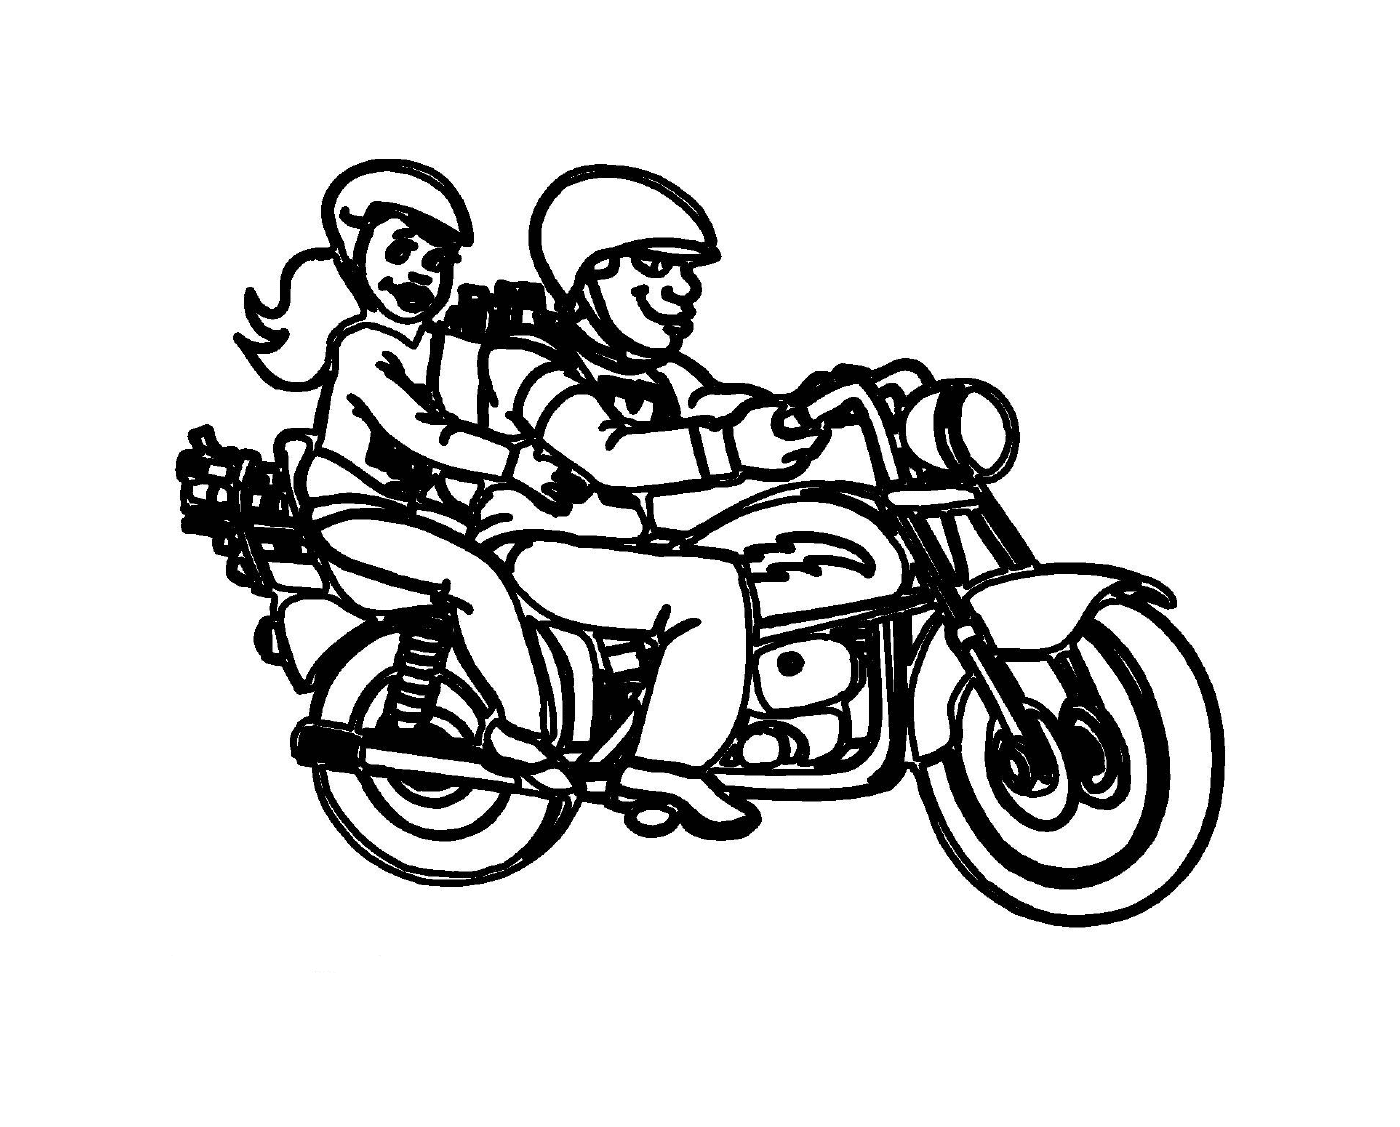  two people on motorcycles 